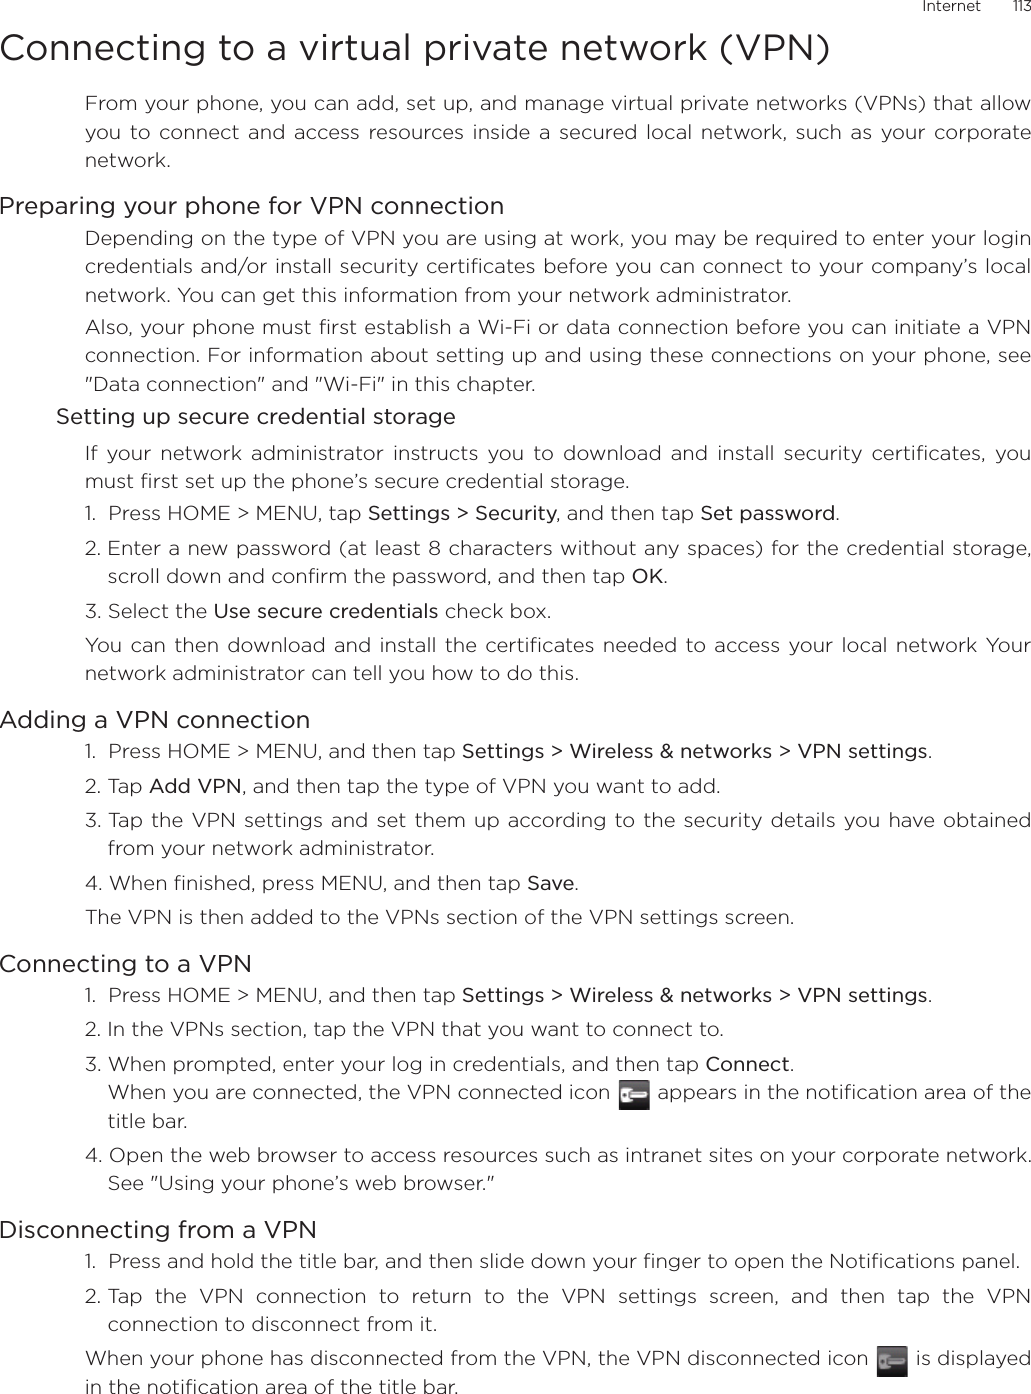 Internet       113Connecting to a virtual private network (VPN)From your phone, you can add, set up, and manage virtual private networks (VPNs) that allowyou to connect and access resources inside a secured local network, such as your corporatenetwork.Preparing your phone for VPN connectionDepending on the type of VPN you are using at work, you may be required to enter your logincredentials and/or install security certificates before you can connect to your company’s localnetwork. You can get this information from your network administrator. Also, your phone must first establish a Wi-Fi or data connection before you can initiate a VPNconnection. For information about setting up and using these connections on your phone, see&quot;Data connection&quot; and &quot;Wi-Fi&quot; in this chapter.Setting up secure credential storageIf your network administrator instructs you to download and install security certificates, youmust first set up the phone’s secure credential storage.1.  Press HOME &gt; MENU, tap Settings &gt; Security, and then tap Set password.2. Enter a new password (at least 8 characters without any spaces) for the credential storage,scroll down and confirm the password, and then tap OK.3. Select the Use secure credentials check box.You can then download and install the certificates needed to access your local network Yournetwork administrator can tell you how to do this.Adding a VPN connection1.  Press HOME &gt; MENU, and then tap Settings &gt; Wireless &amp; networks &gt; VPN settings.2. Tap Add VPN, and then tap the type of VPN you want to add.3. Tap the VPN settings and set them up according to the security details you have obtainedfrom your network administrator.4. When finished, press MENU, and then tap Save.The VPN is then added to the VPNs section of the VPN settings screen.Connecting to a VPN1.  Press HOME &gt; MENU, and then tap Settings &gt; Wireless &amp; networks &gt; VPN settings.2. In the VPNs section, tap the VPN that you want to connect to.3. When prompted, enter your log in credentials, and then tap Connect.When you are connected, the VPN connected icon   appears in the notification area of thetitle bar.4. Open the web browser to access resources such as intranet sites on your corporate network.See &quot;Using your phone’s web browser.&quot; Disconnecting from a VPN1.  Press and hold the title bar, and then slide down your finger to open the Notifications panel.2. Tap the VPN connection to return to the VPN settings screen, and then tap the VPNconnection to disconnect from it. When your phone has disconnected from the VPN, the VPN disconnected icon   is displayedin the notification area of the title bar.